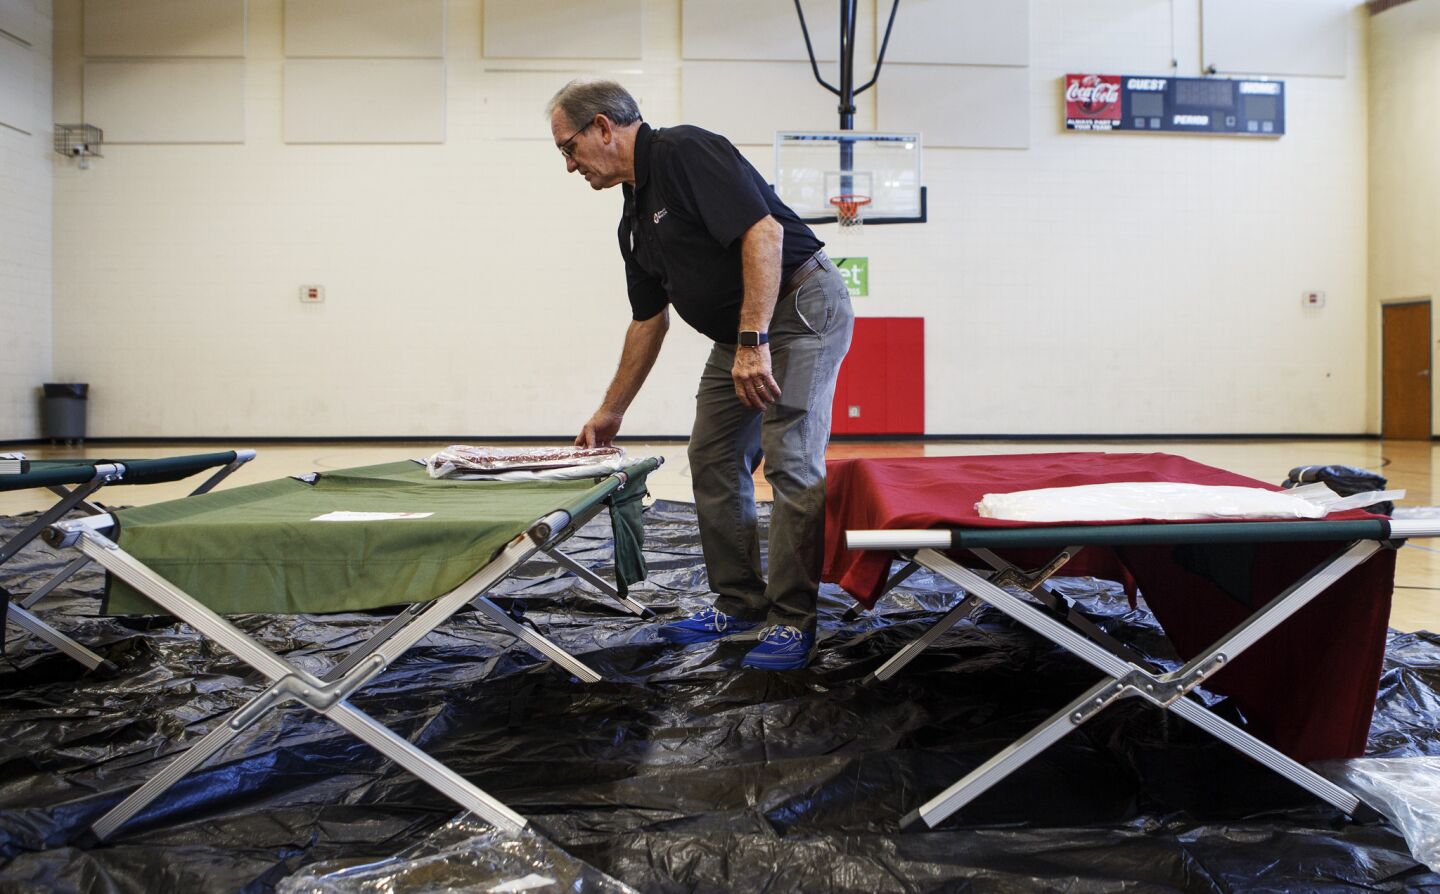 Southeast Tennessee American Red Cross Disaster Program Manager Jerry Wang preps cots in the gym at the Brainerd Youth and Family Development Center on Thursday, Sept. 13, 2018 in Chattanooga, Tenn. The Hamilton County Office of Emergency Management, American Red Cross and other organizations are joining to open and operate a shelter at the Brainerd Youth & Family Development Center for coastal residents fleeing Hurricane Florence, according to a news release.